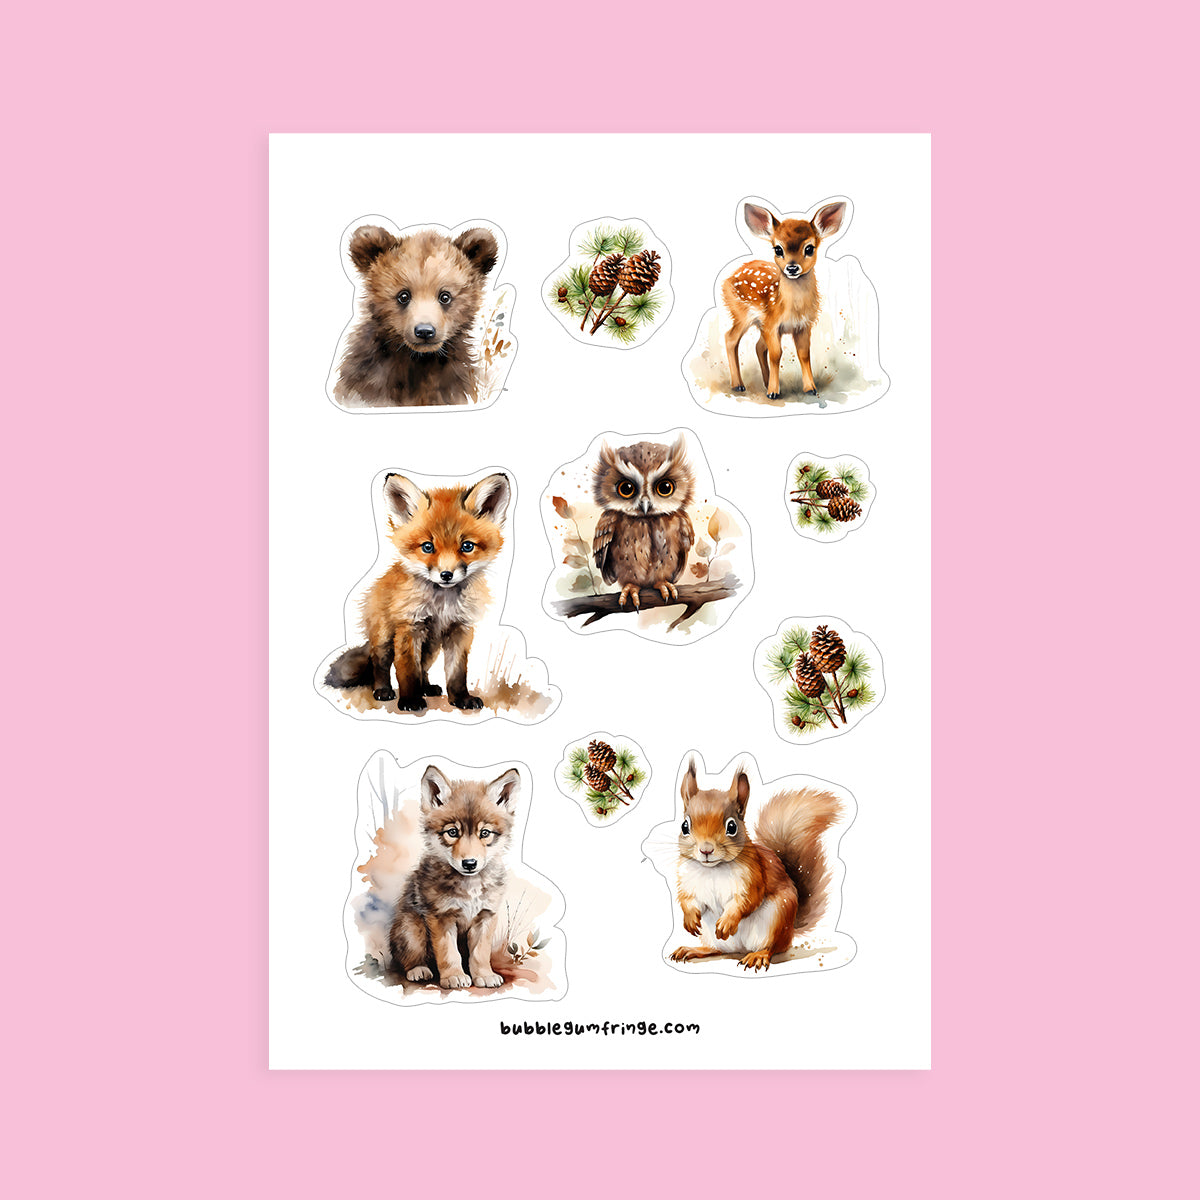 Sticker sheet with watercolor illustrations of woodland animals - style 1